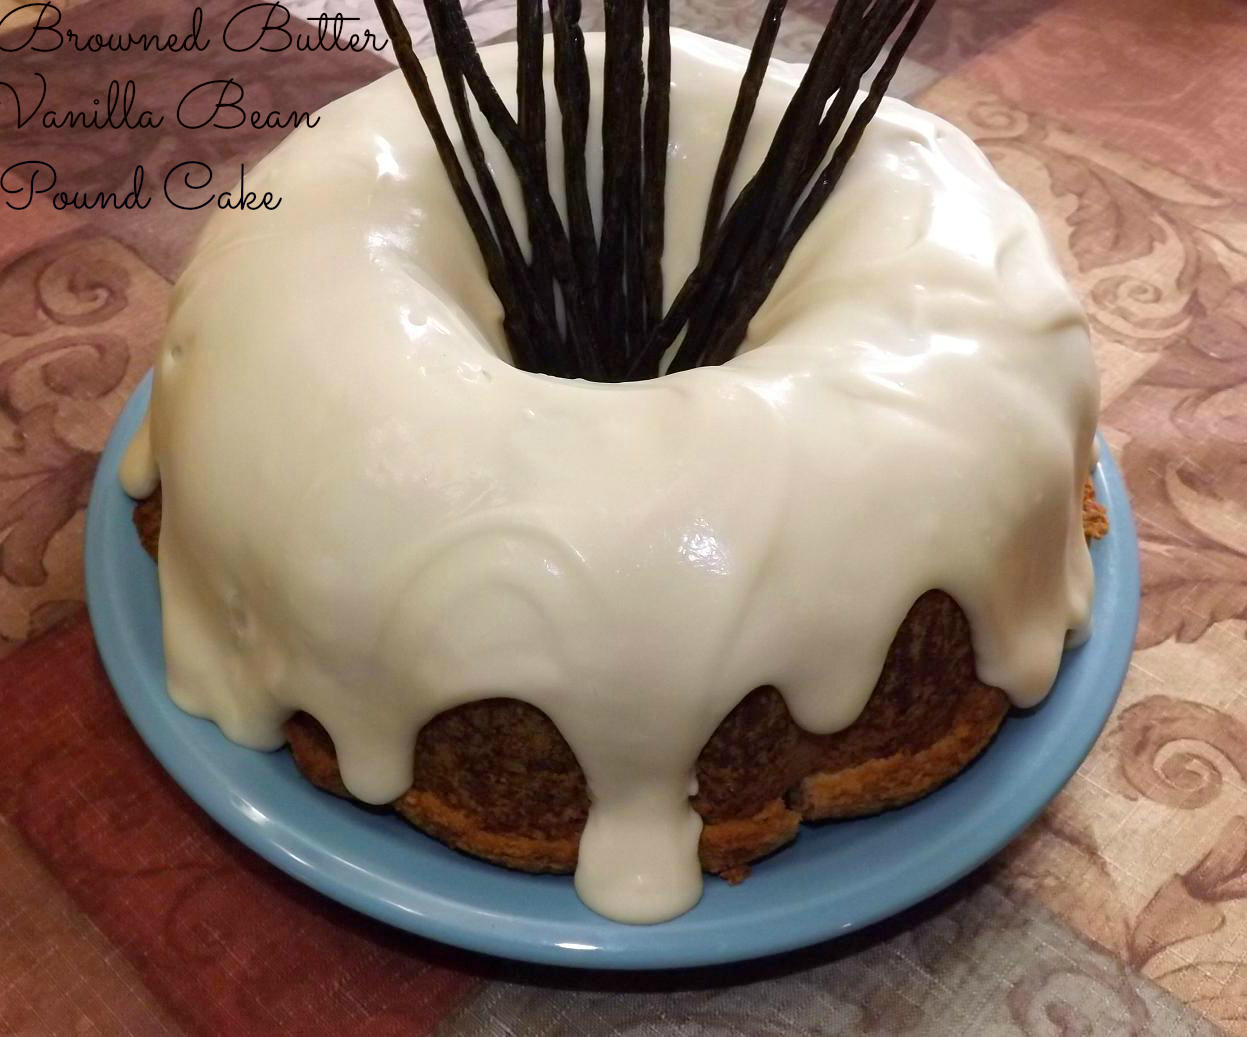 Browned Butter Vanilla Bean Pound Cake